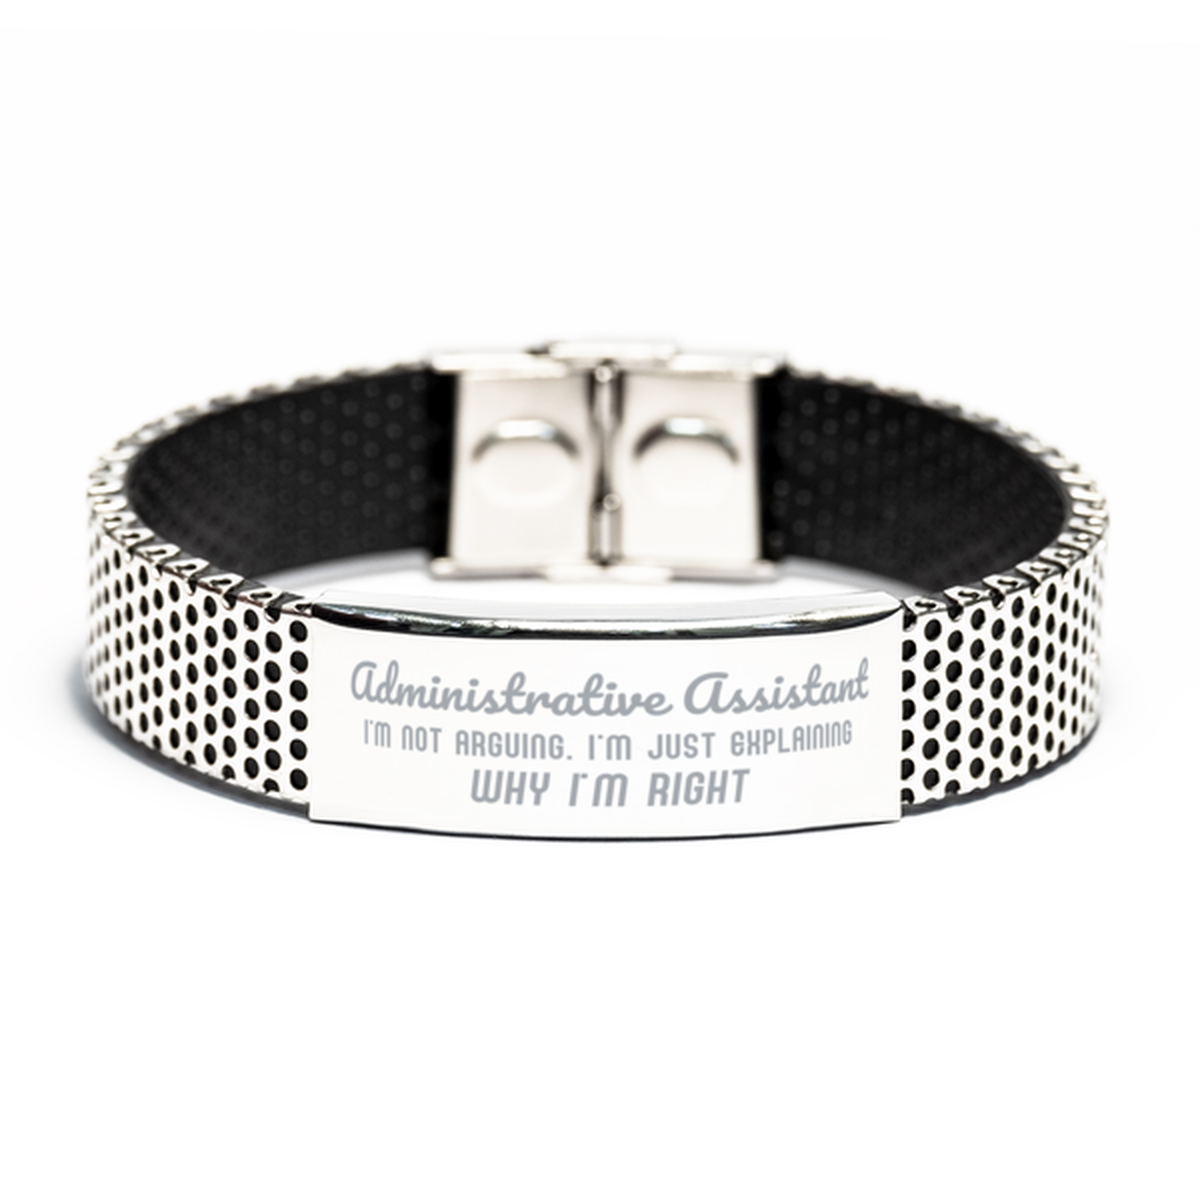 Administrative Assistant I'm not Arguing. I'm Just Explaining Why I'm RIGHT Stainless Steel Bracelet, Funny Saying Quote Administrative Assistant Gifts For Administrative Assistant Graduation Birthday Christmas Gifts for Men Women Coworker